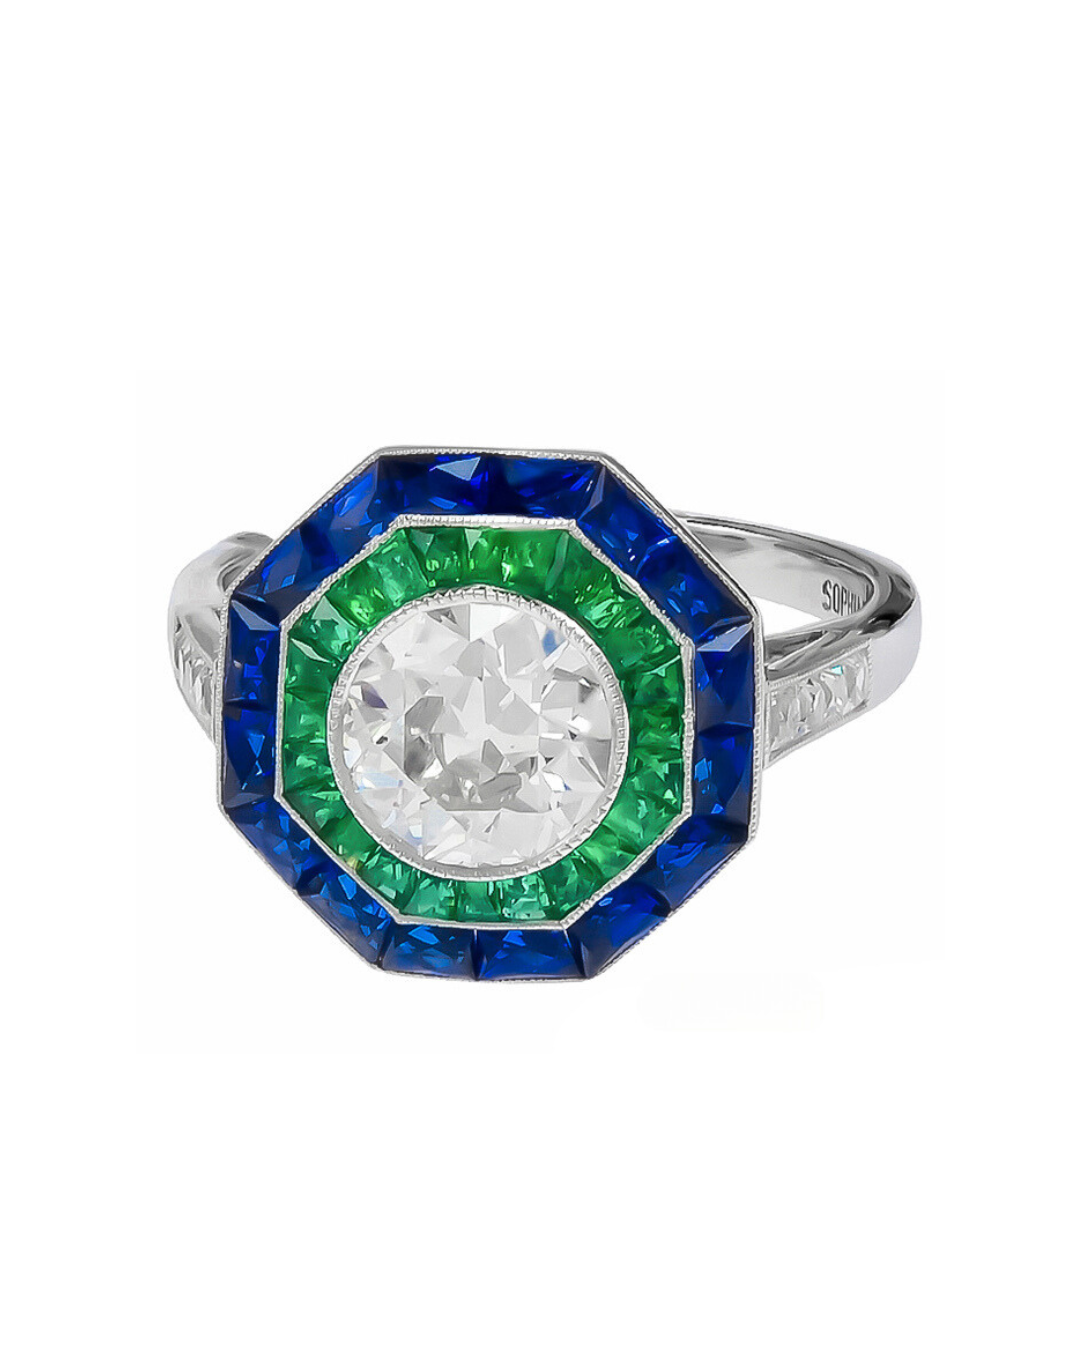 Sophia D. Hexagonal Ring with French Cut Sapphire and Emeralds and a Round Diamond Center